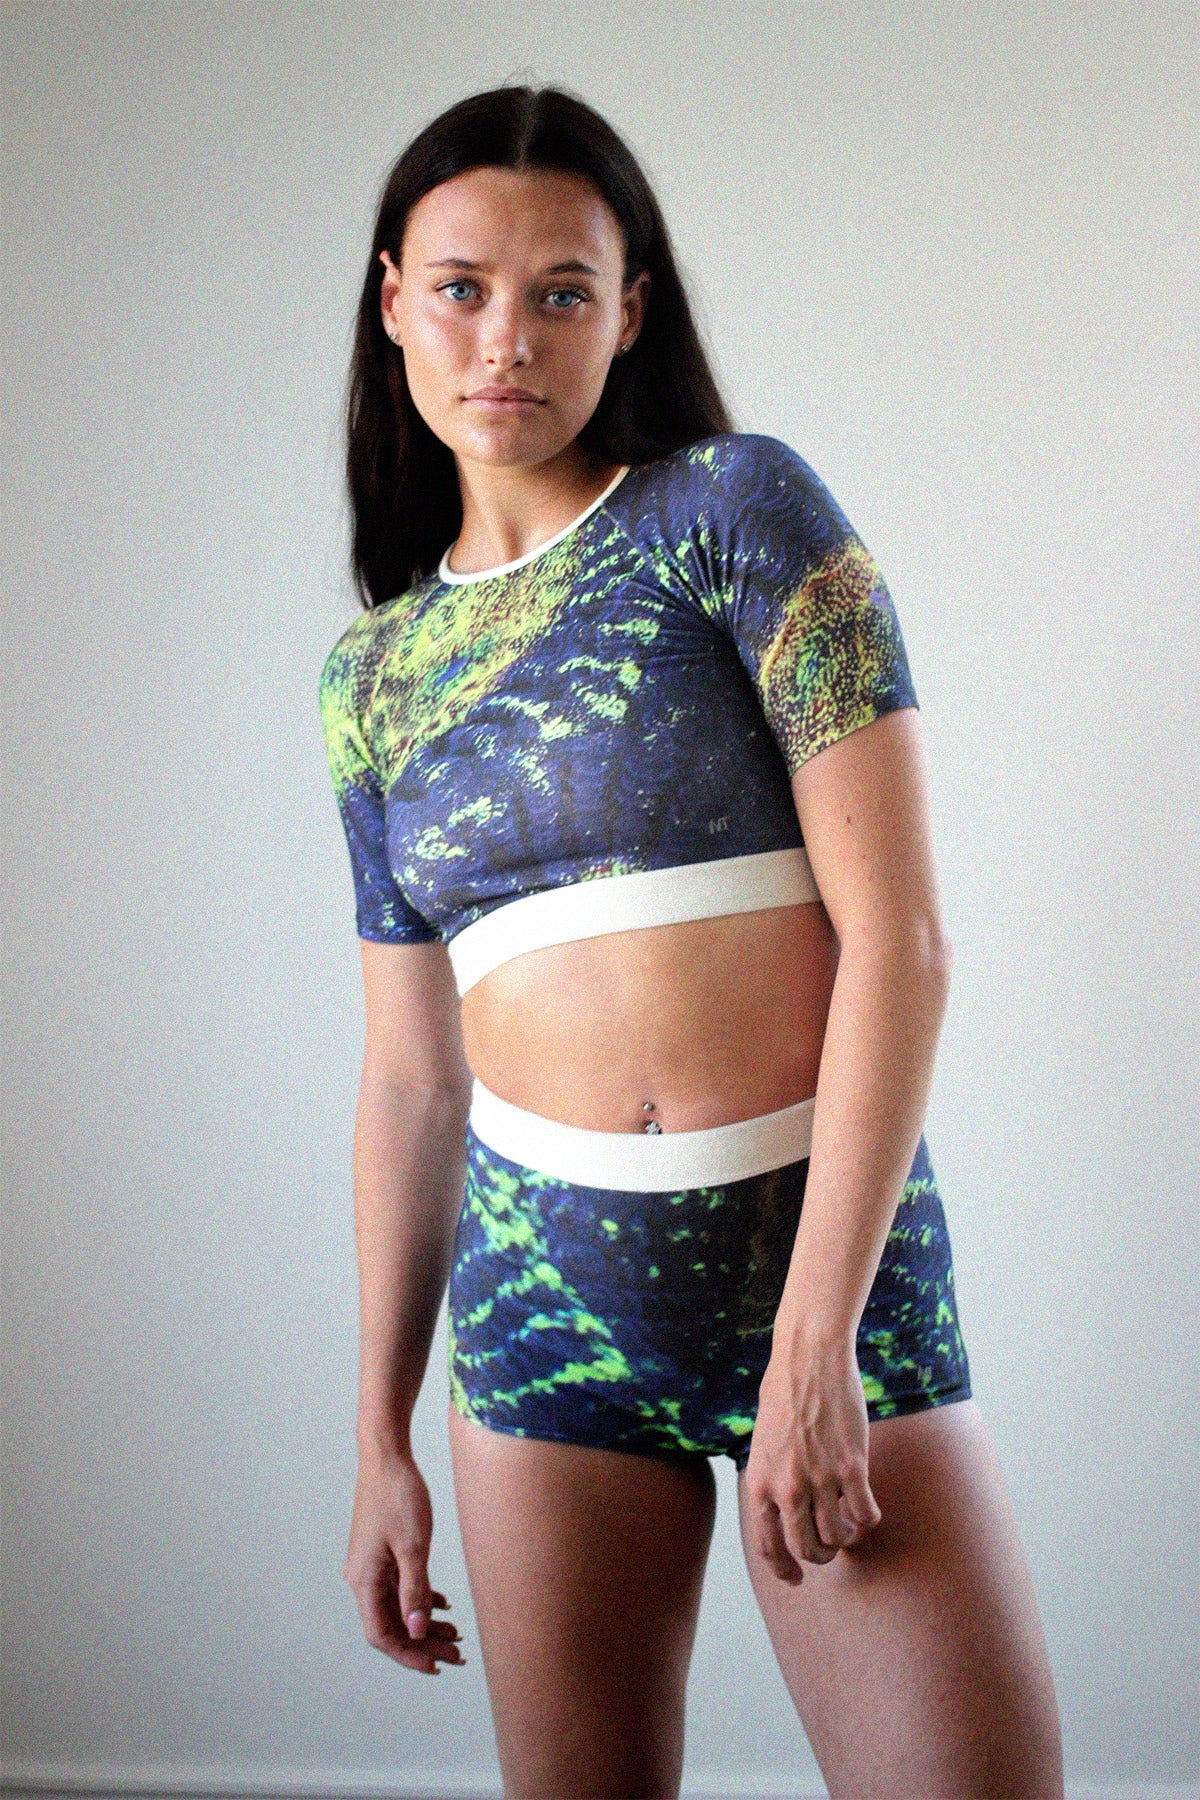 girl women wearing rash-guard printed in coral image in blue and neon green print made out of plant based fabric and hemp. girl with blue eyes and brown hair.